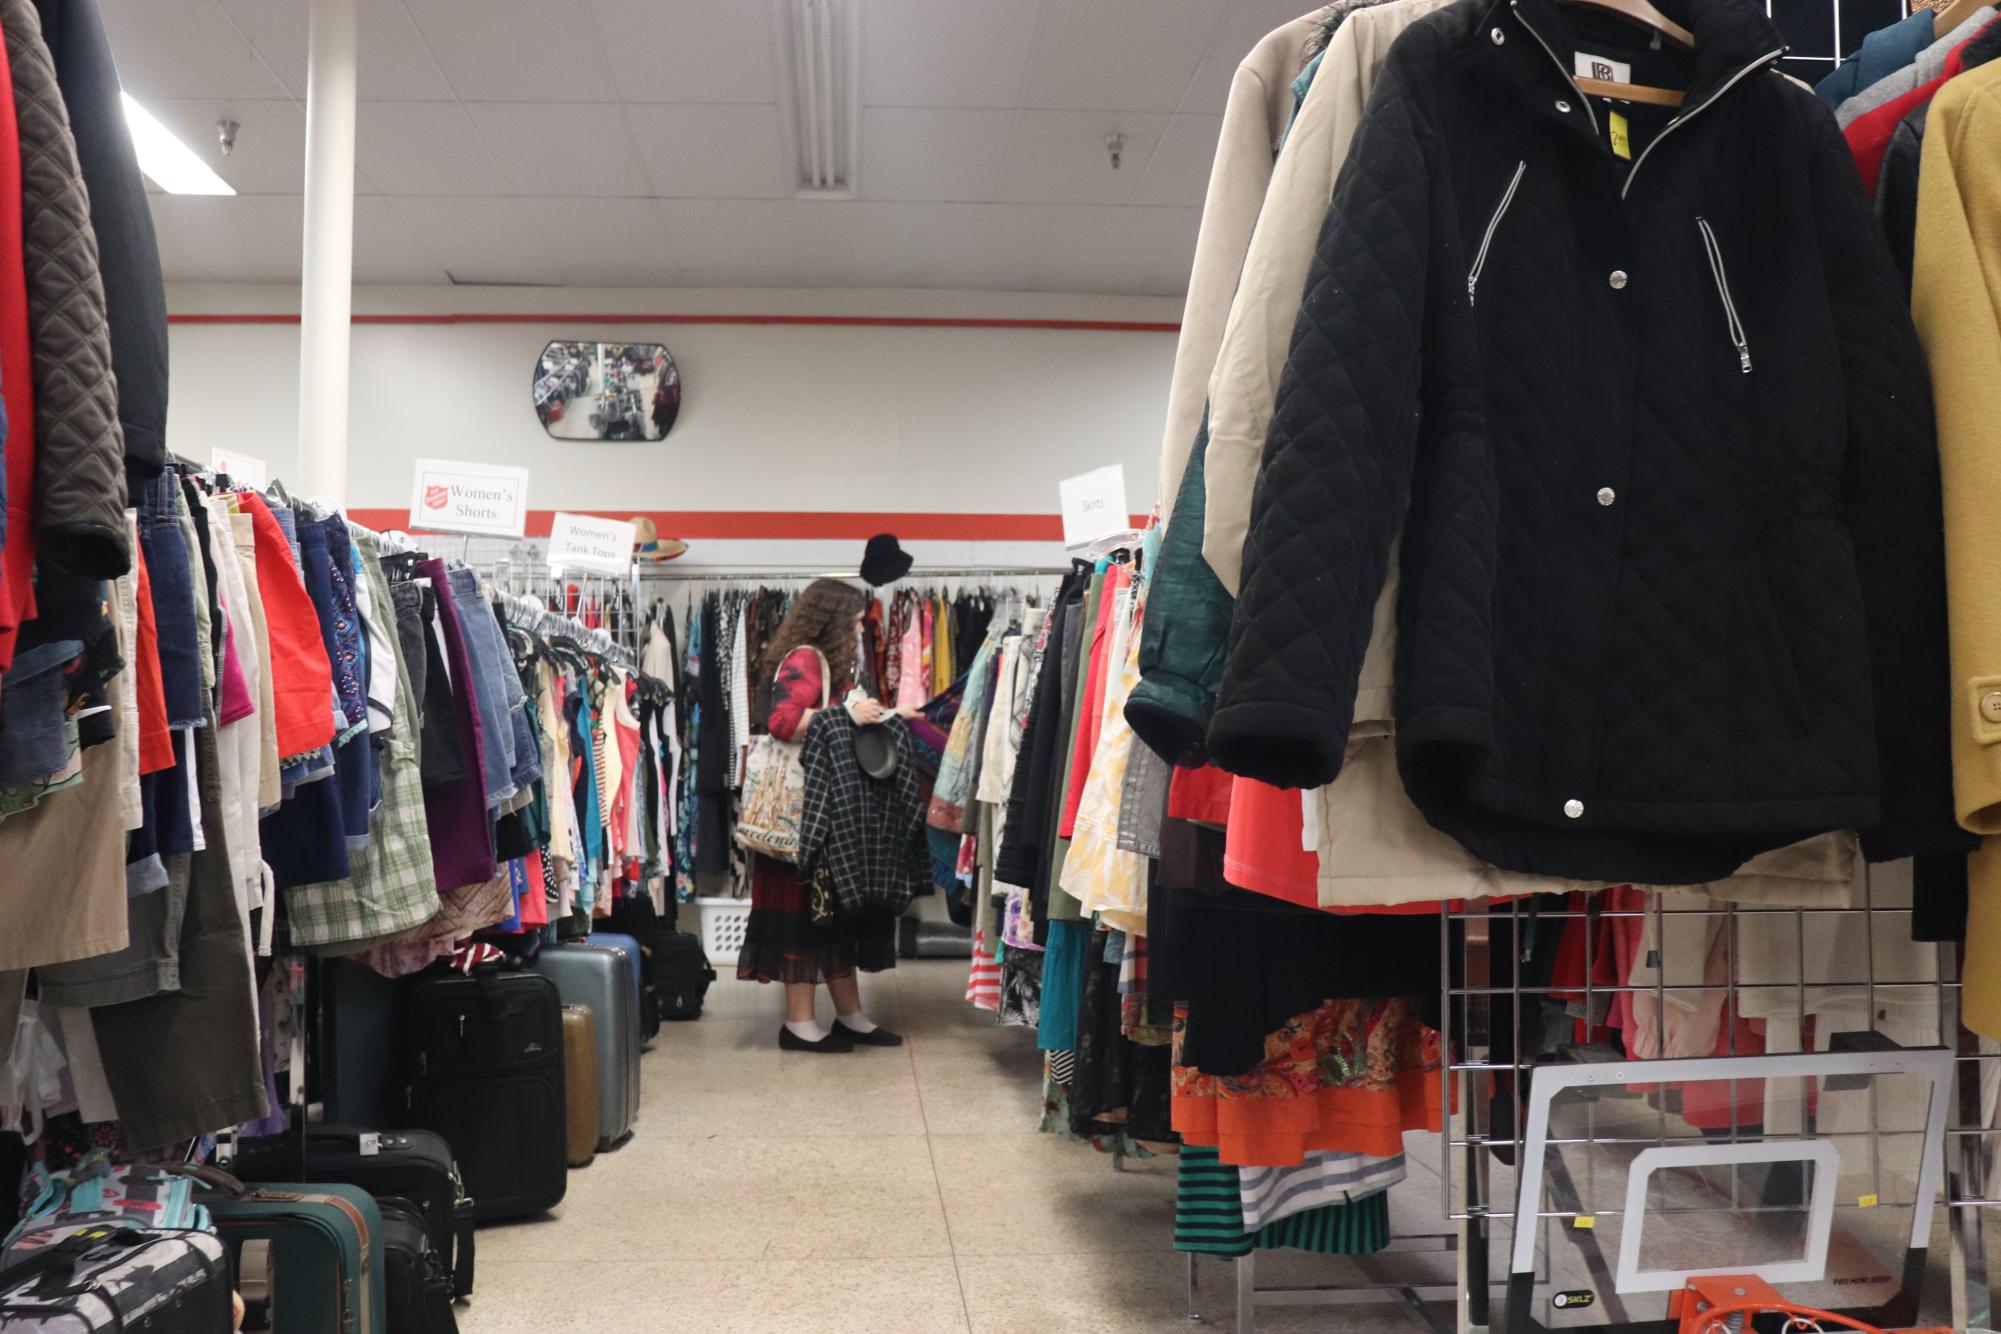 Eleanor Weitz 24 peruses the skirt section at the Salvation Army Family Store.  